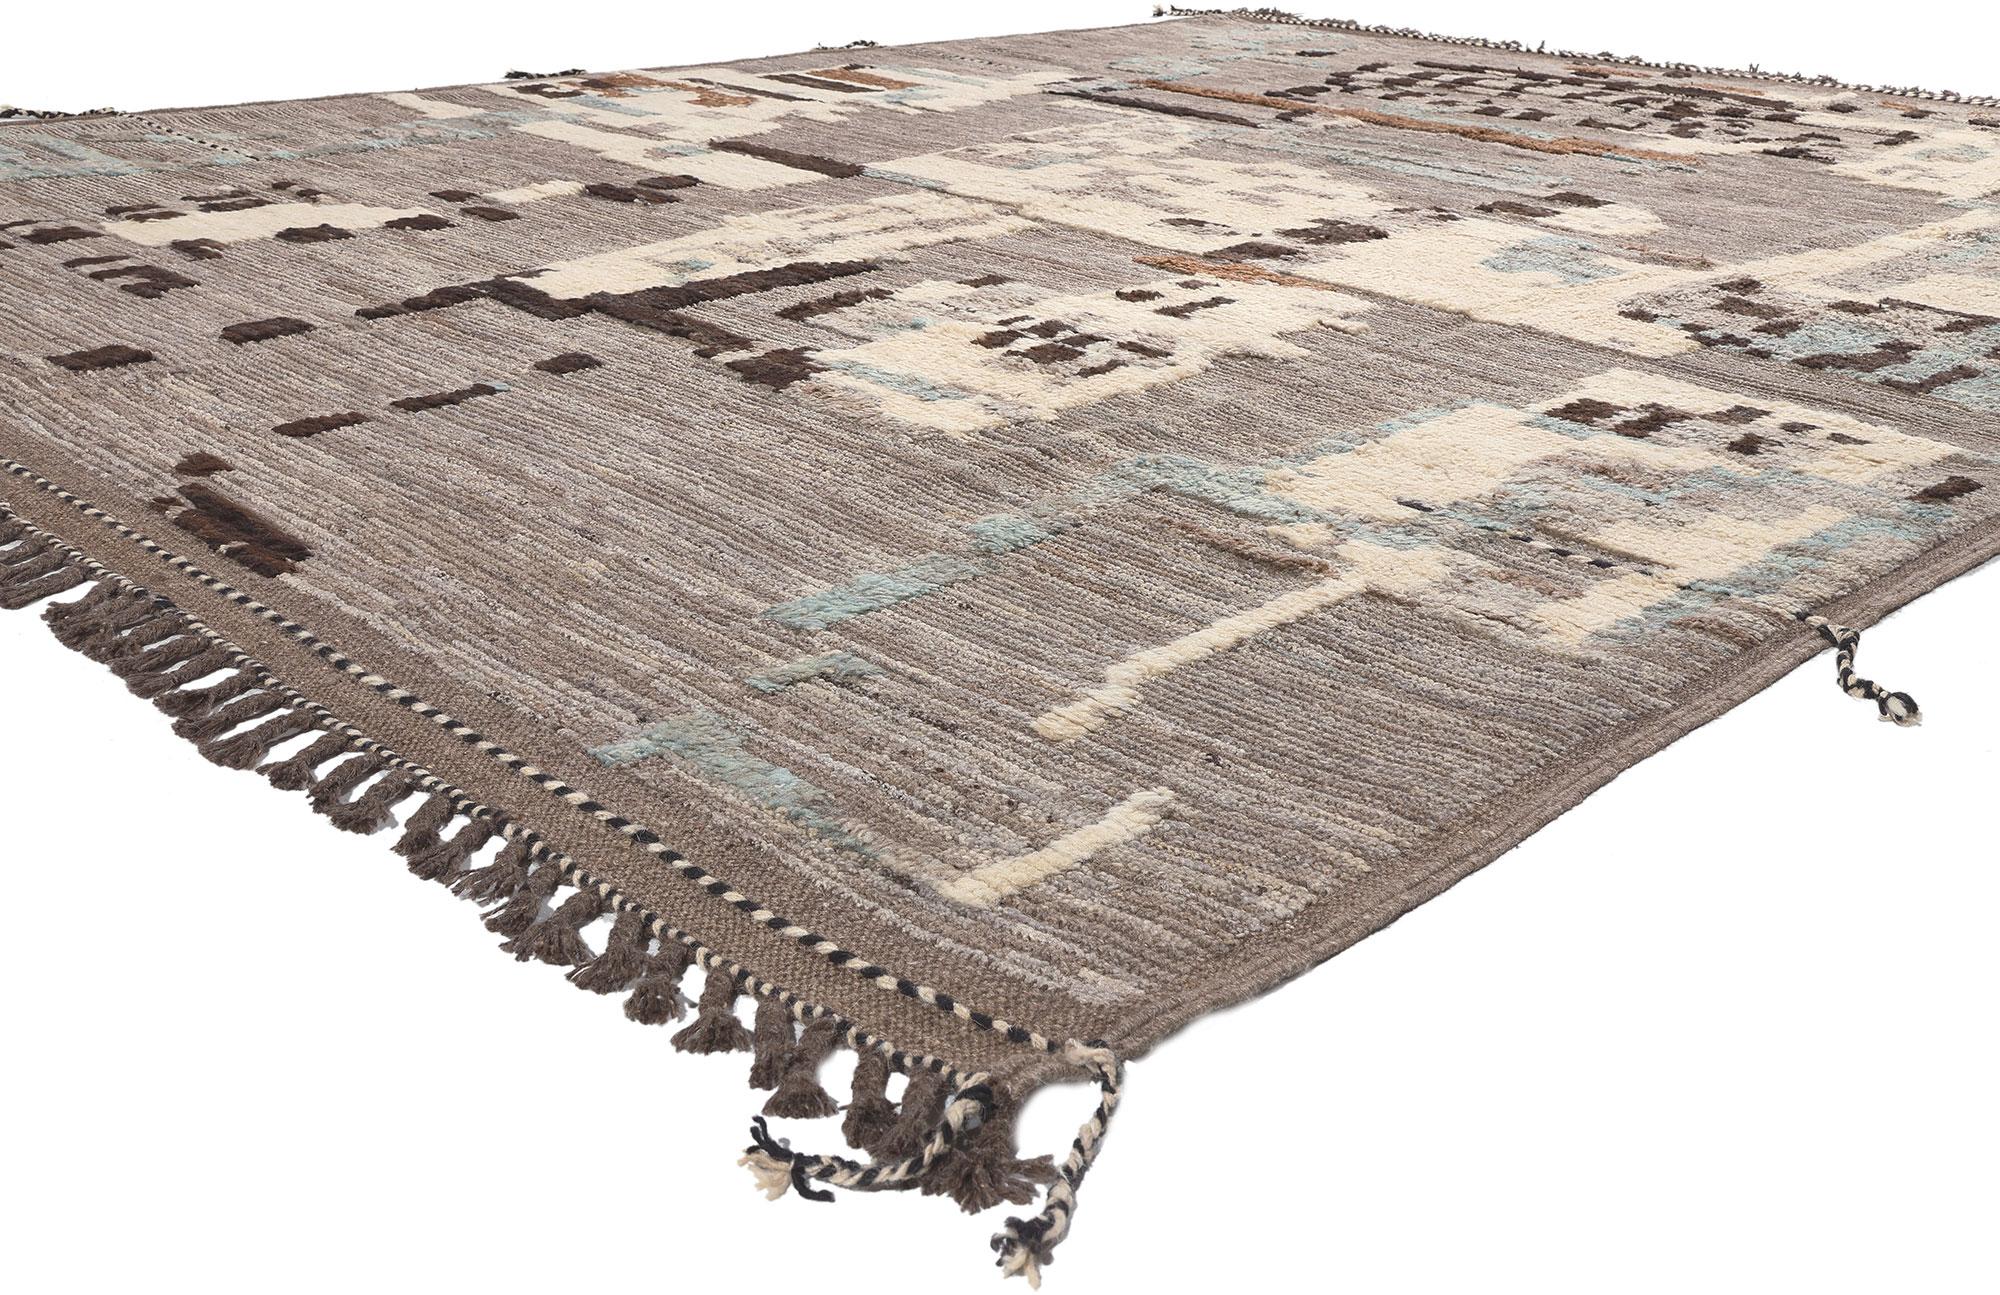 80981 Modern Moroccan Rug with Earth-Tone Colors, 09'11 x 12'09. Emanating Biophilic Design with incredible detail and texture, this large Moroccan high-low rug is a captivating vision of woven beauty. The raised design and earthy colorway woven